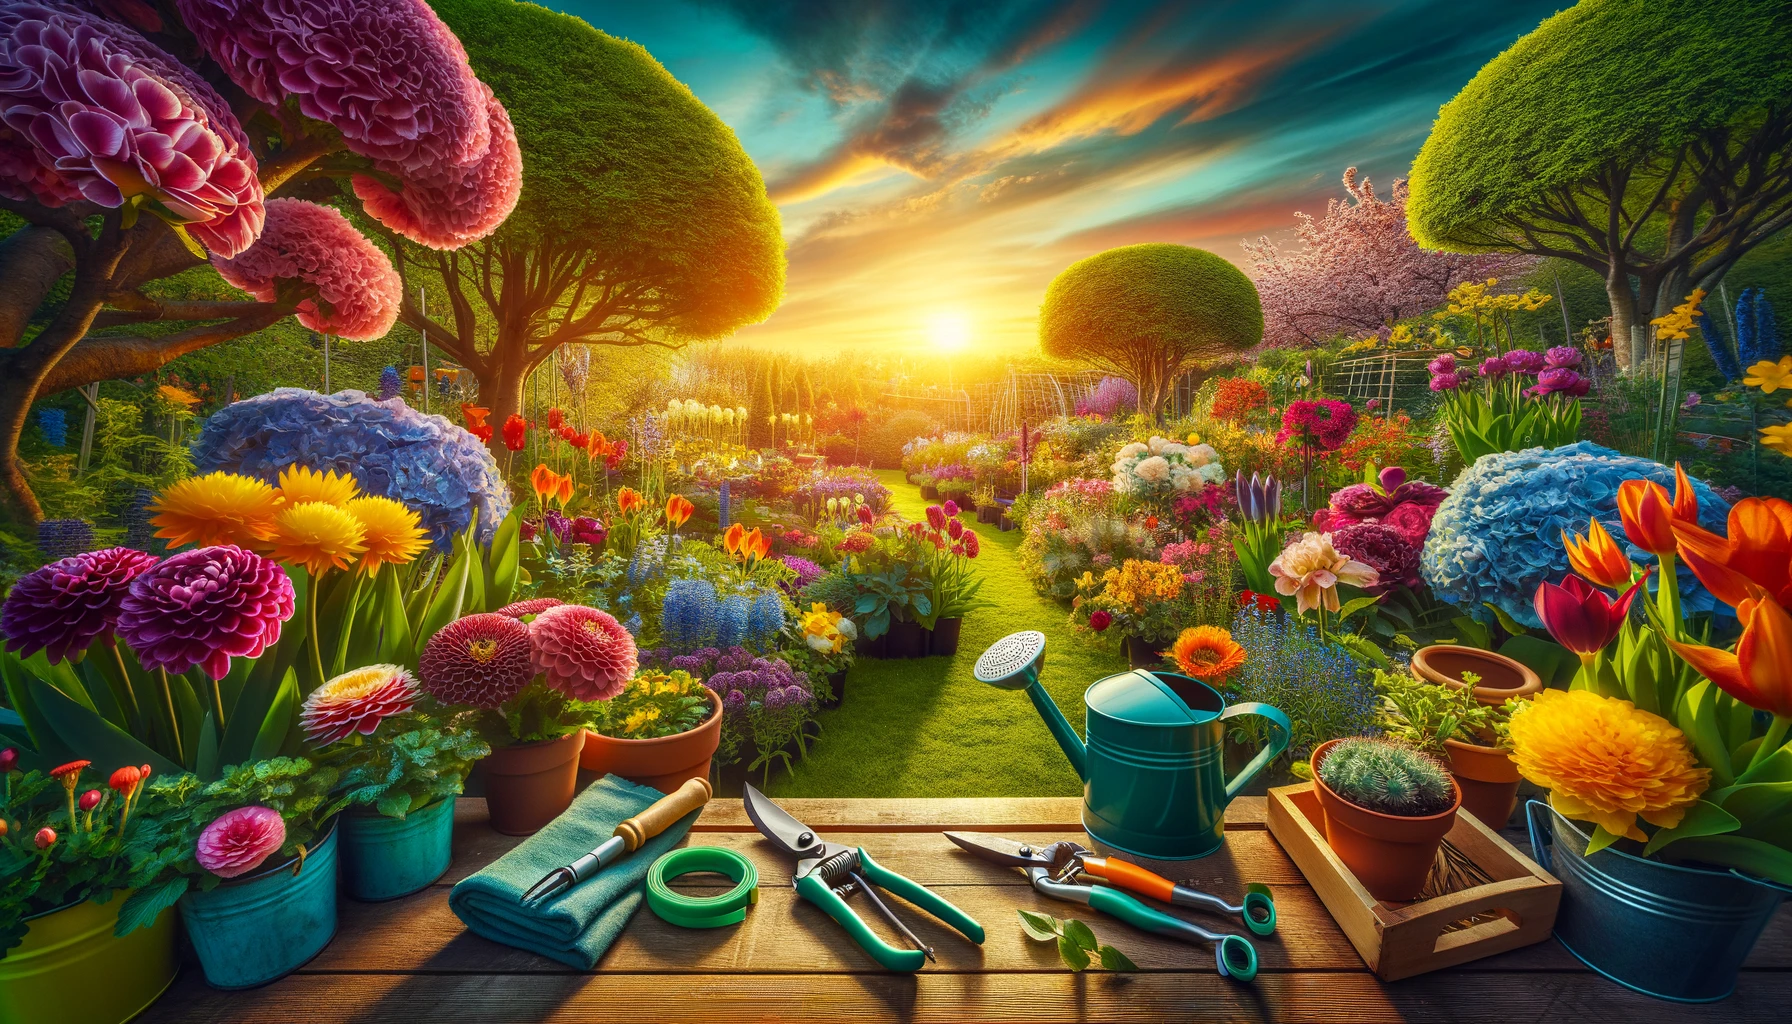 Vibrant garden with colorful flowers and gardening tools.